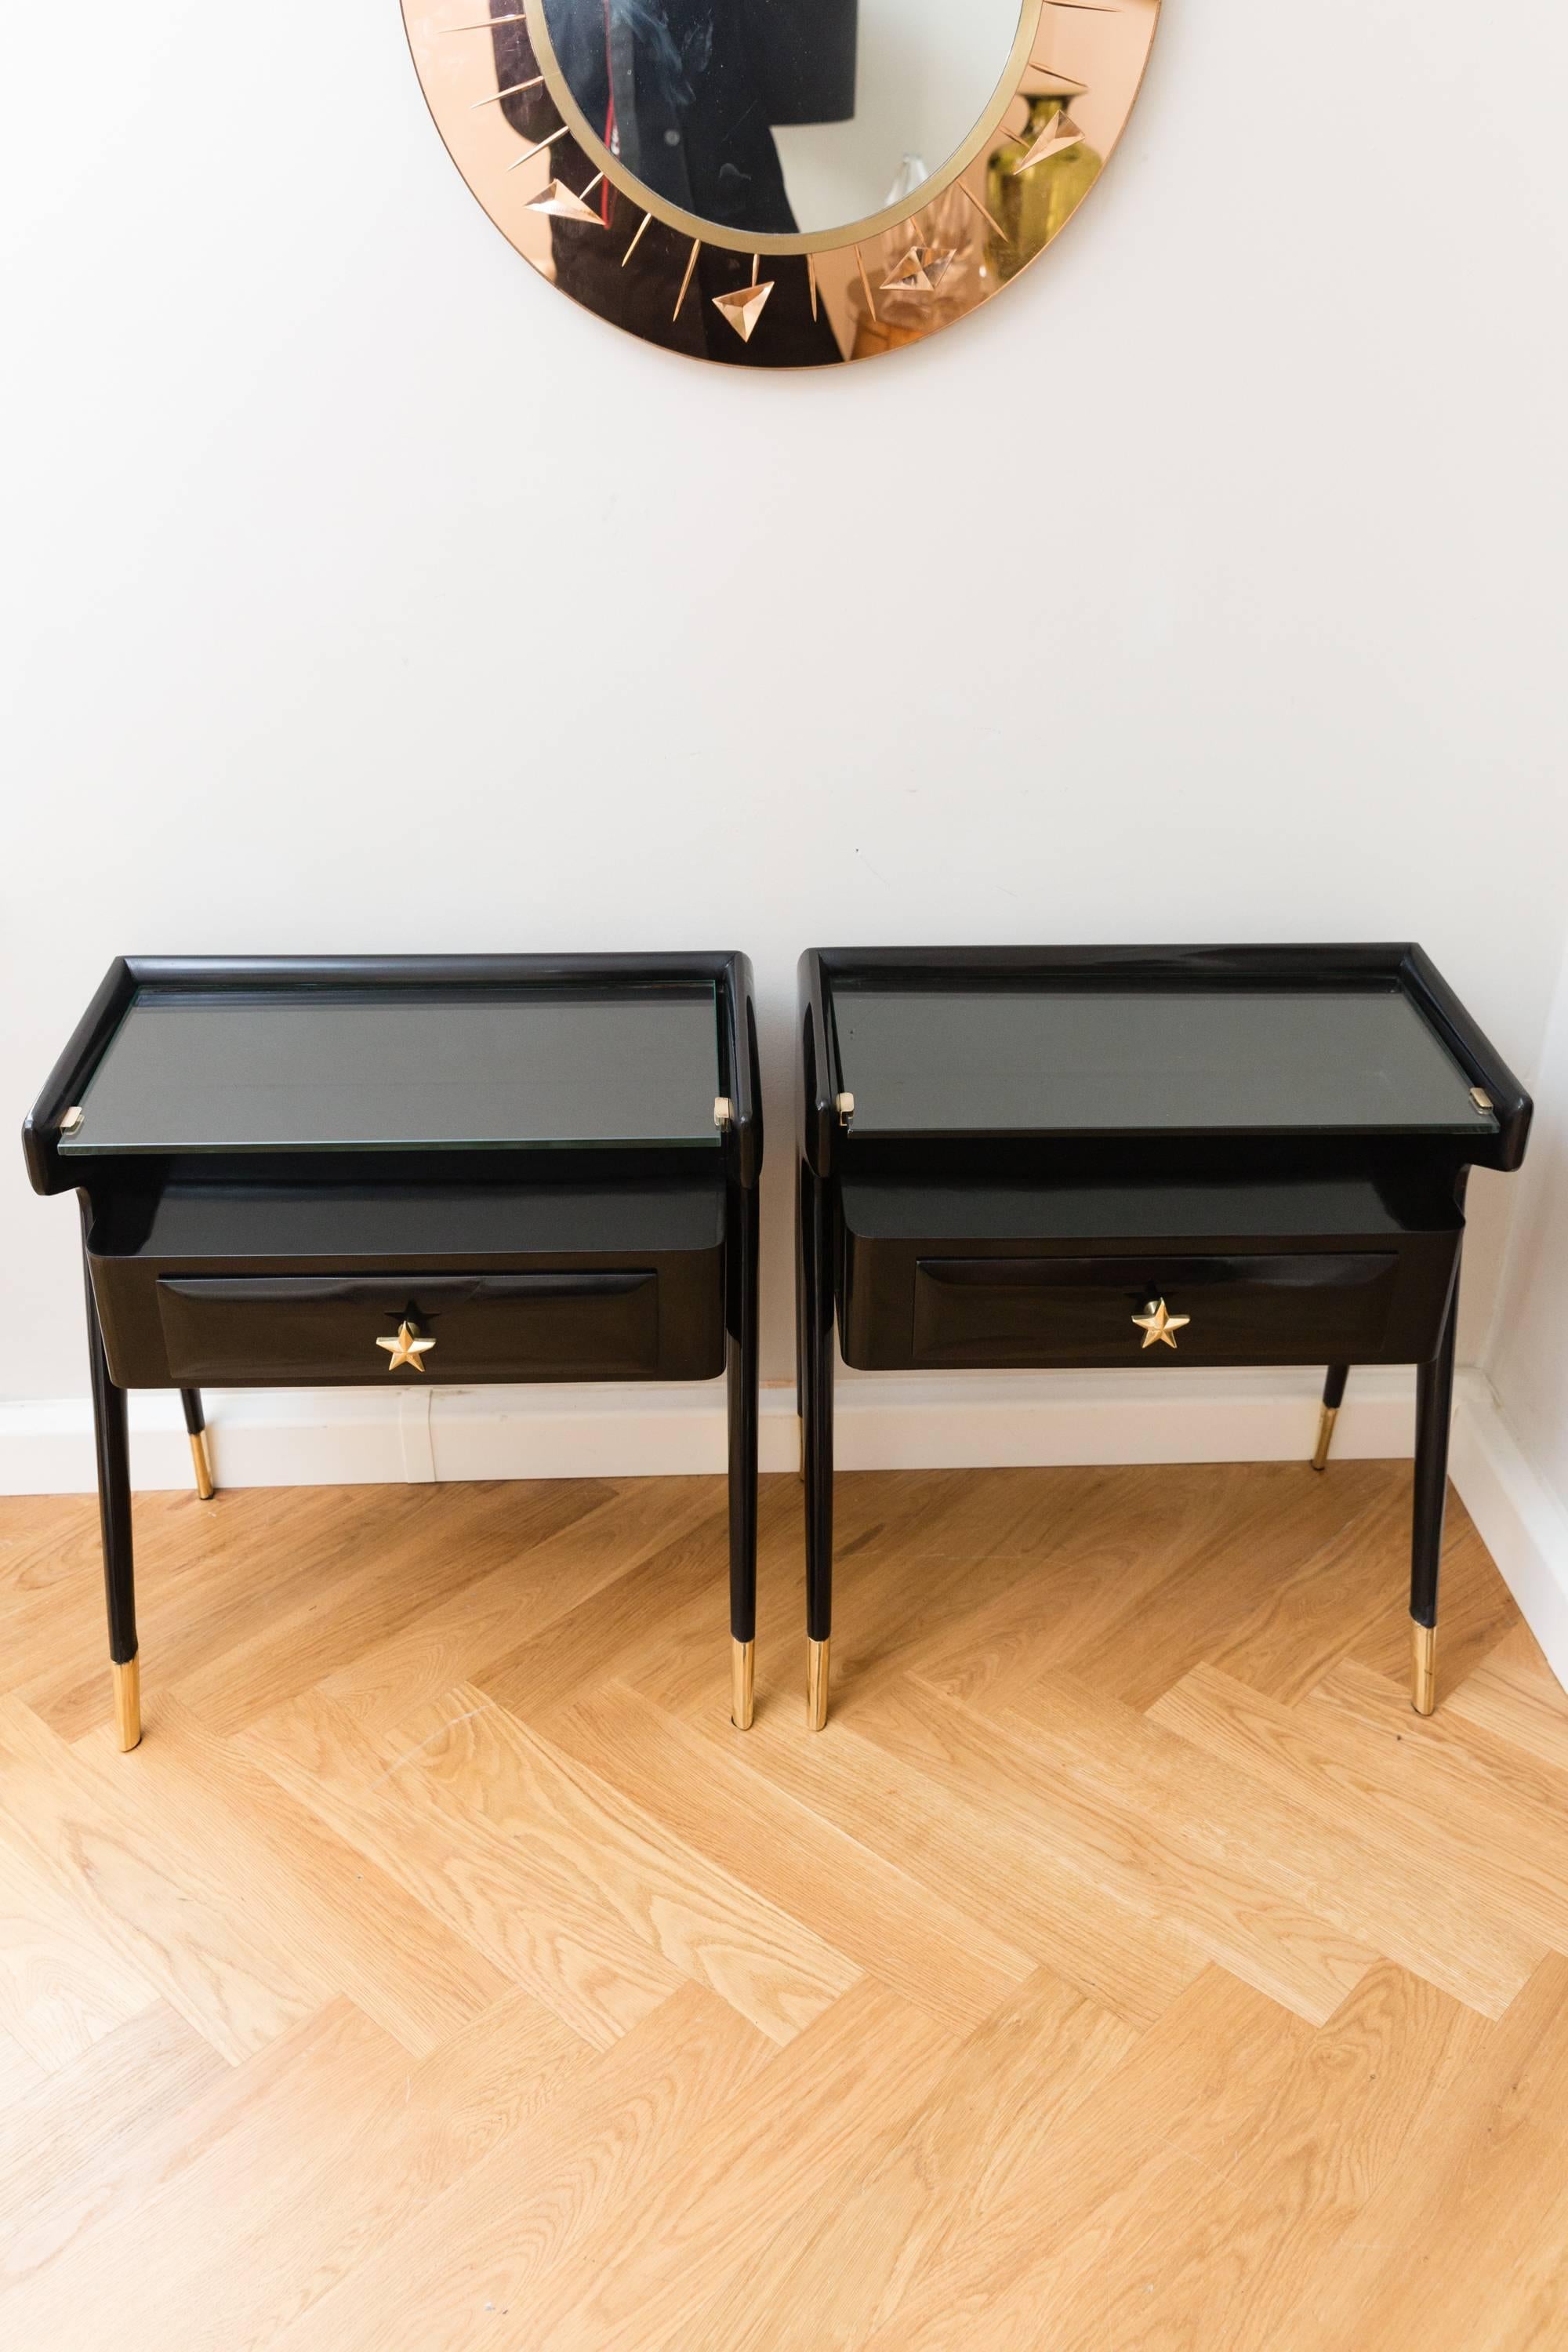 Pair of Side Tables, Italy, circa 1950 (Messing)